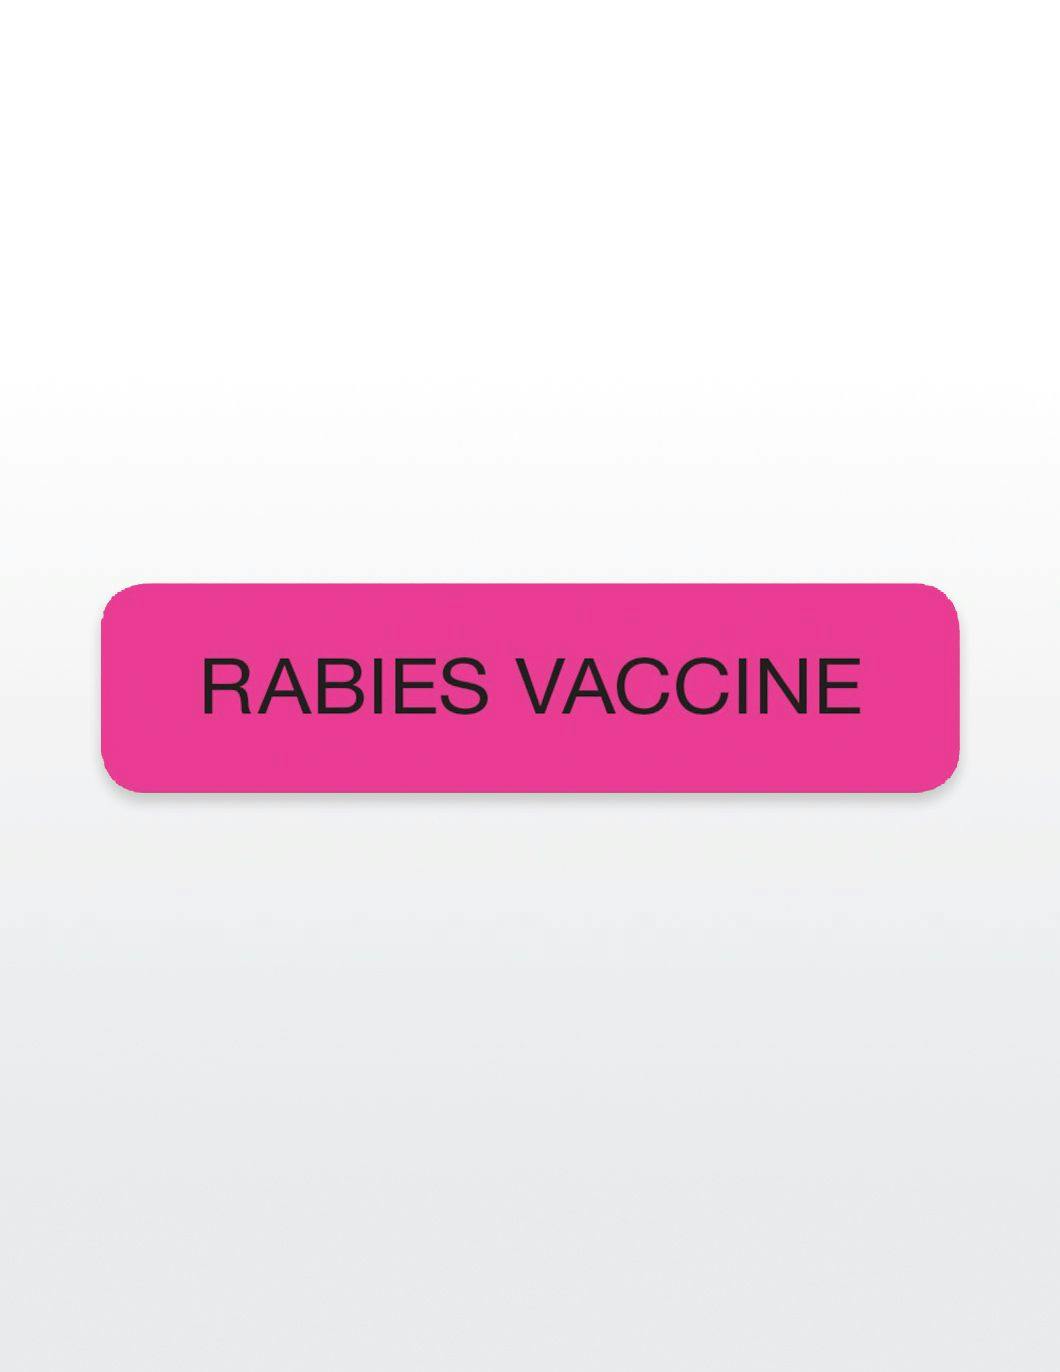 rabies-vaccine-med-stickers